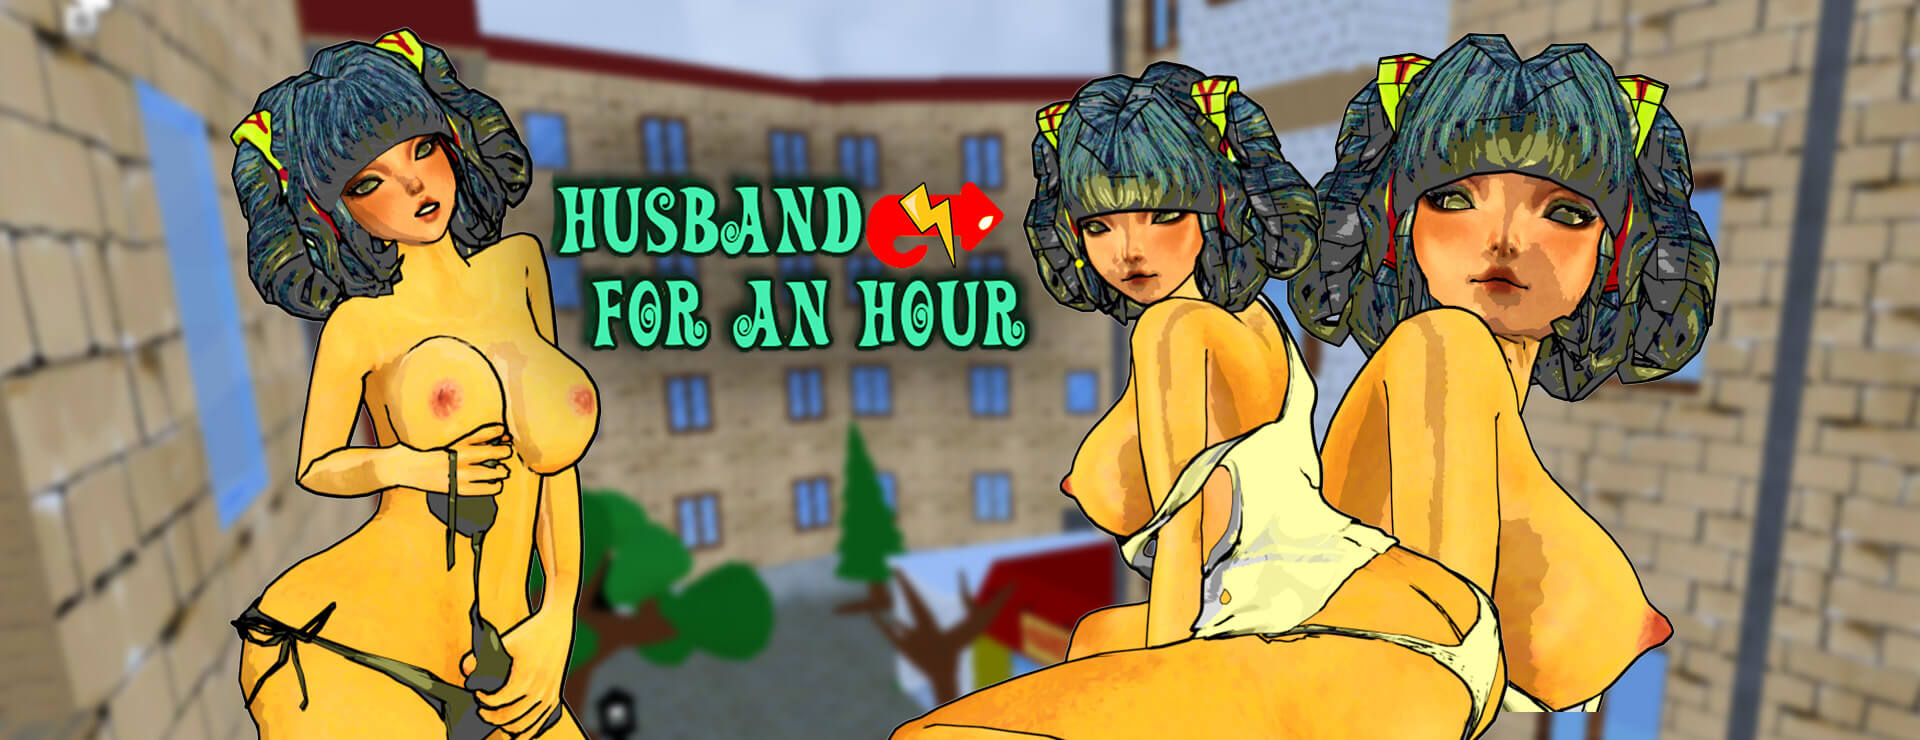 Husband for an Hour - Action Adventure Game